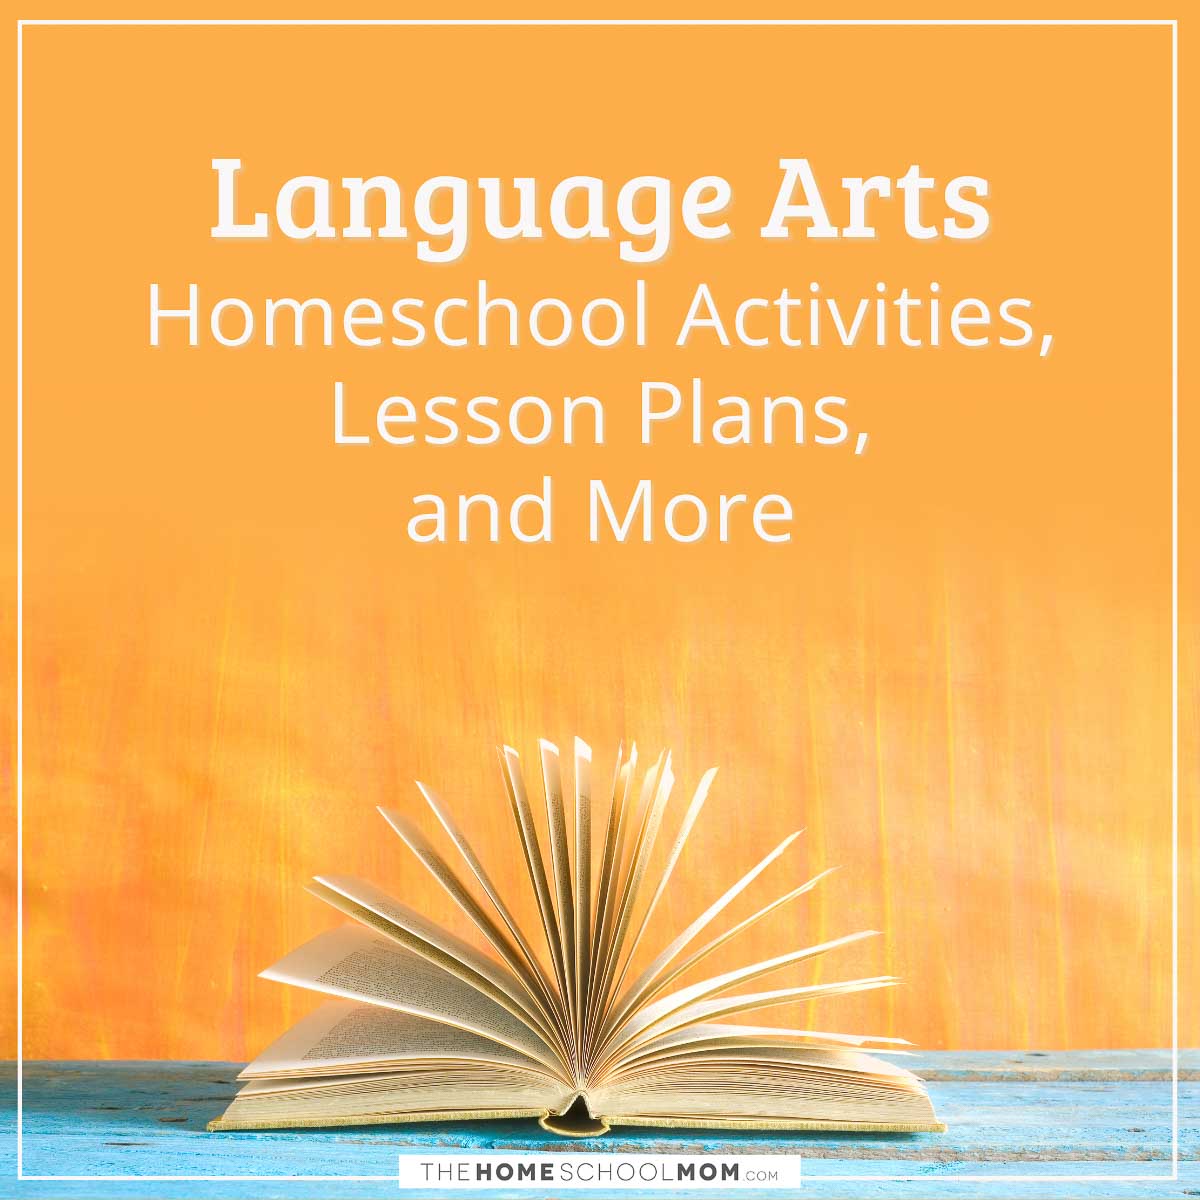 Language arts homeschool activities, lesson plans, and more.